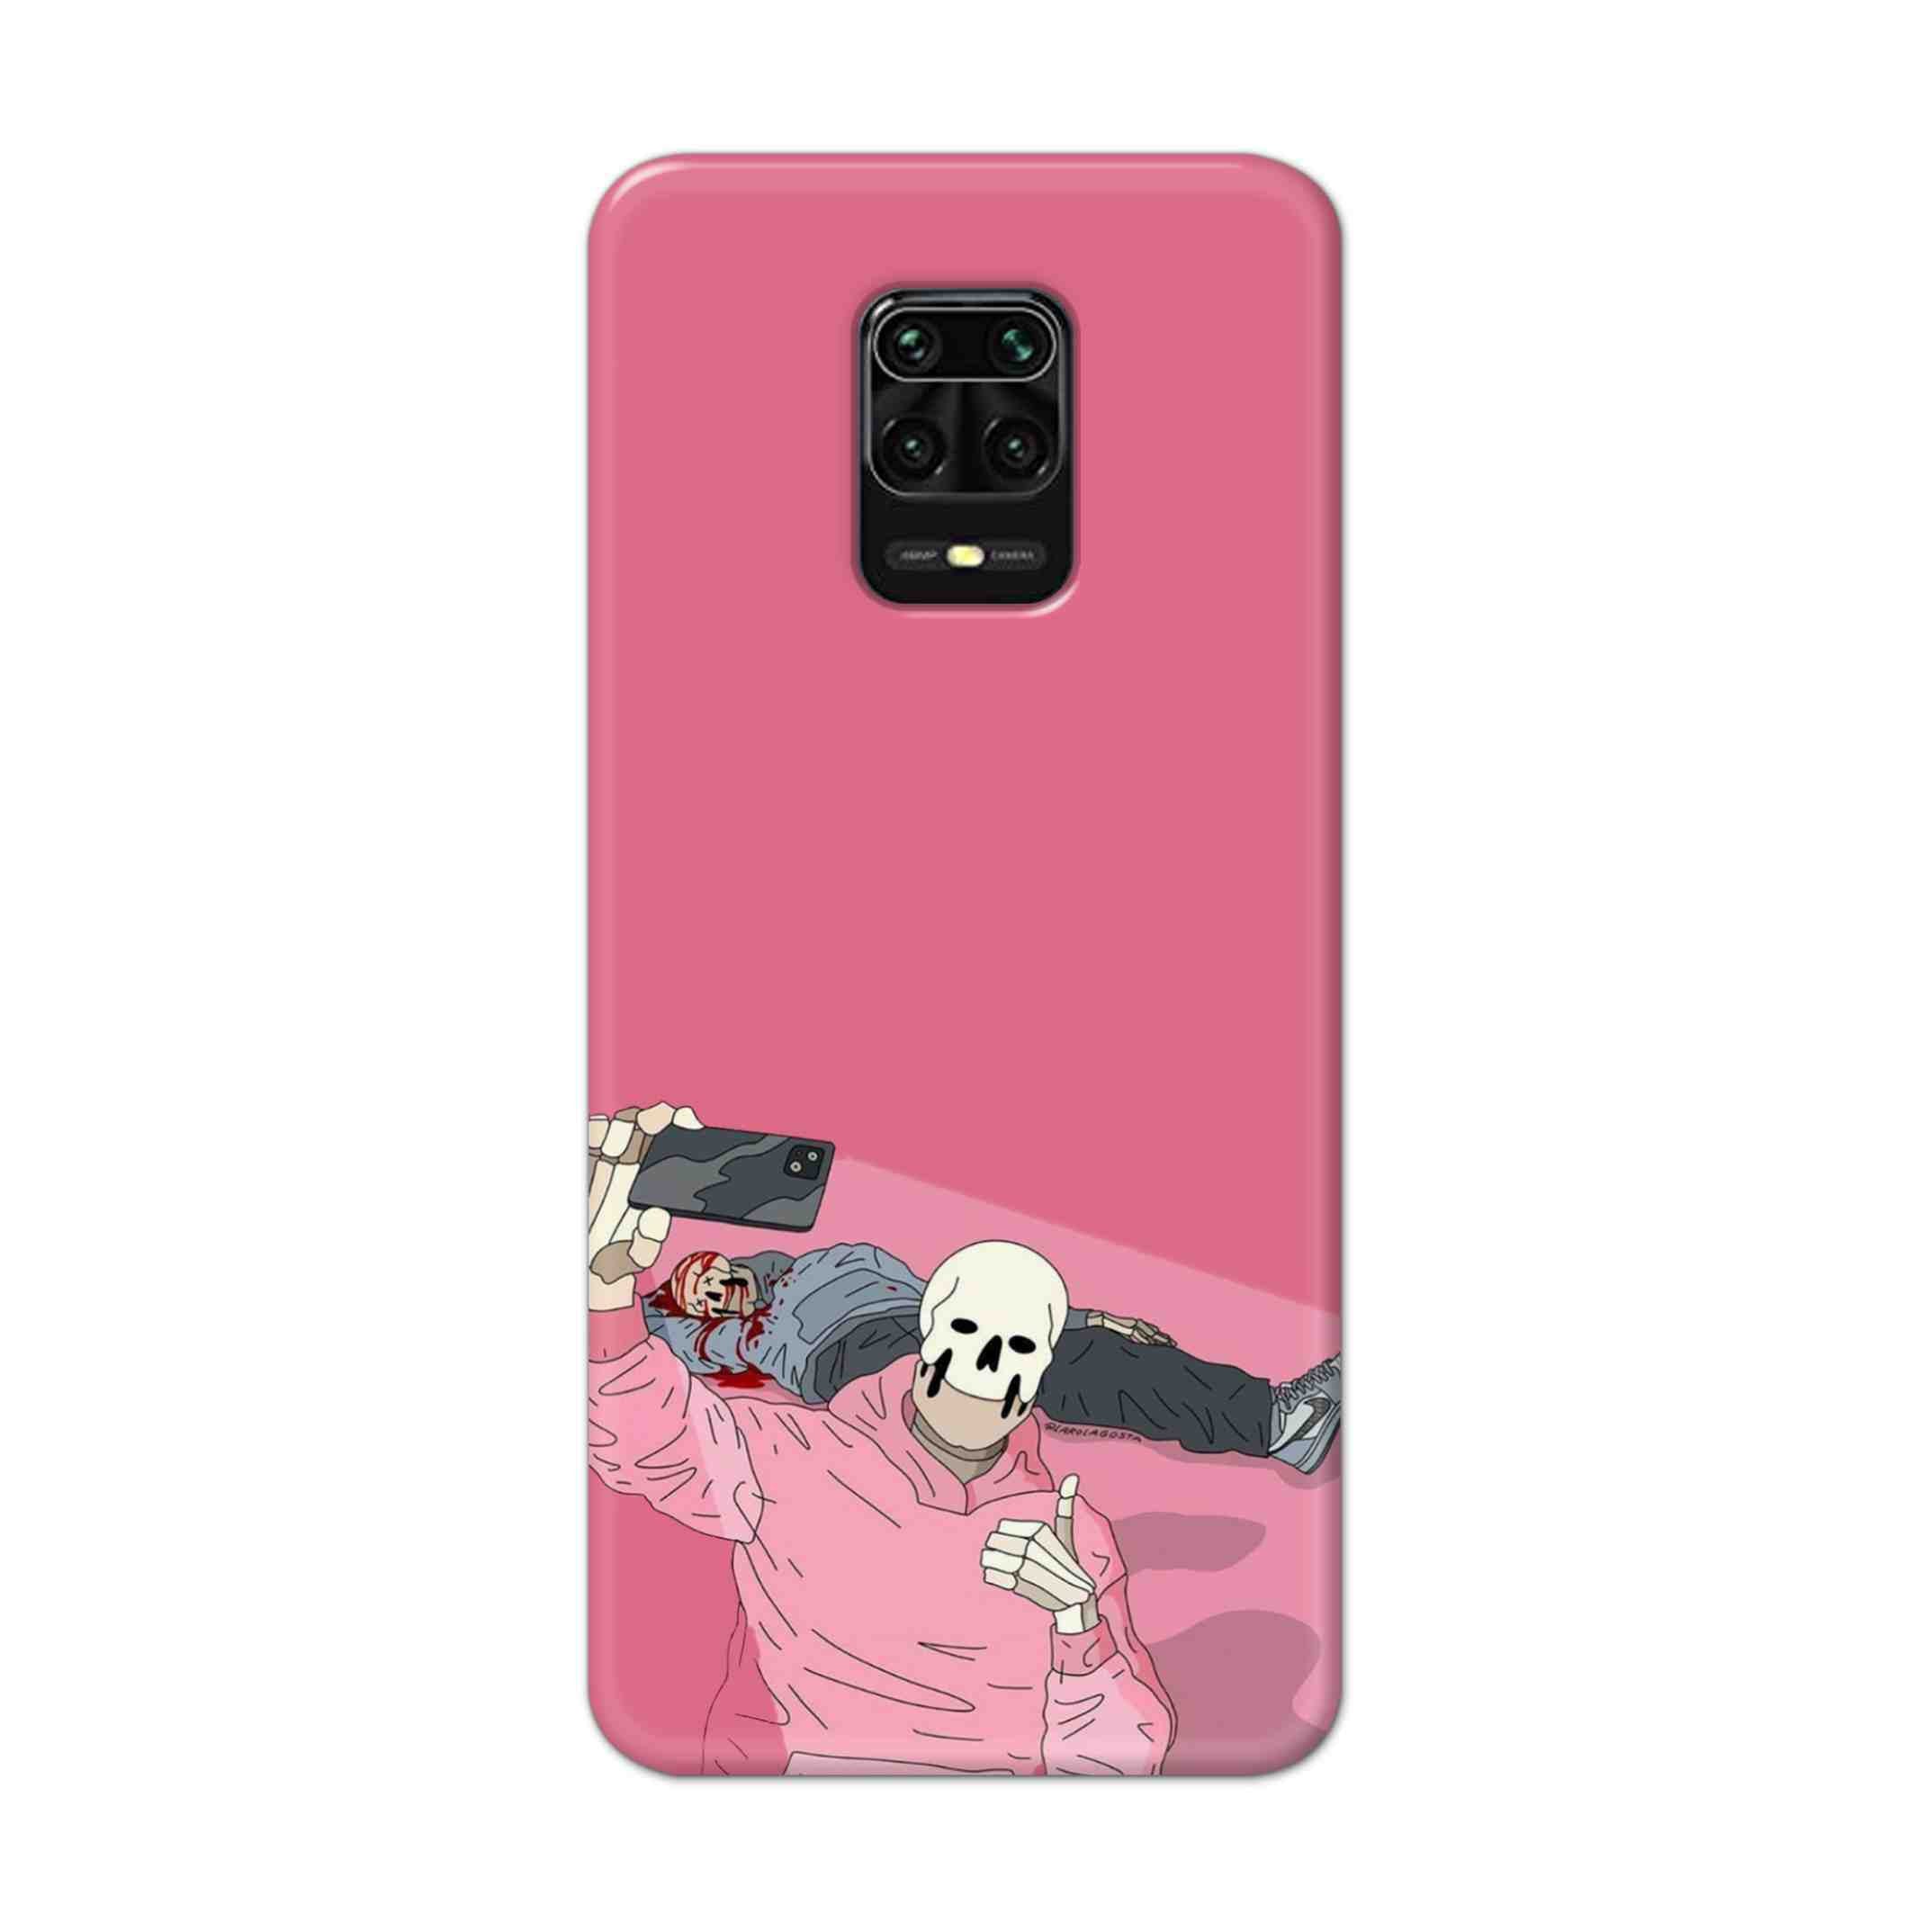 Buy Selfie Hard Back Mobile Phone Case Cover For Redmi Note 9 Pro Online